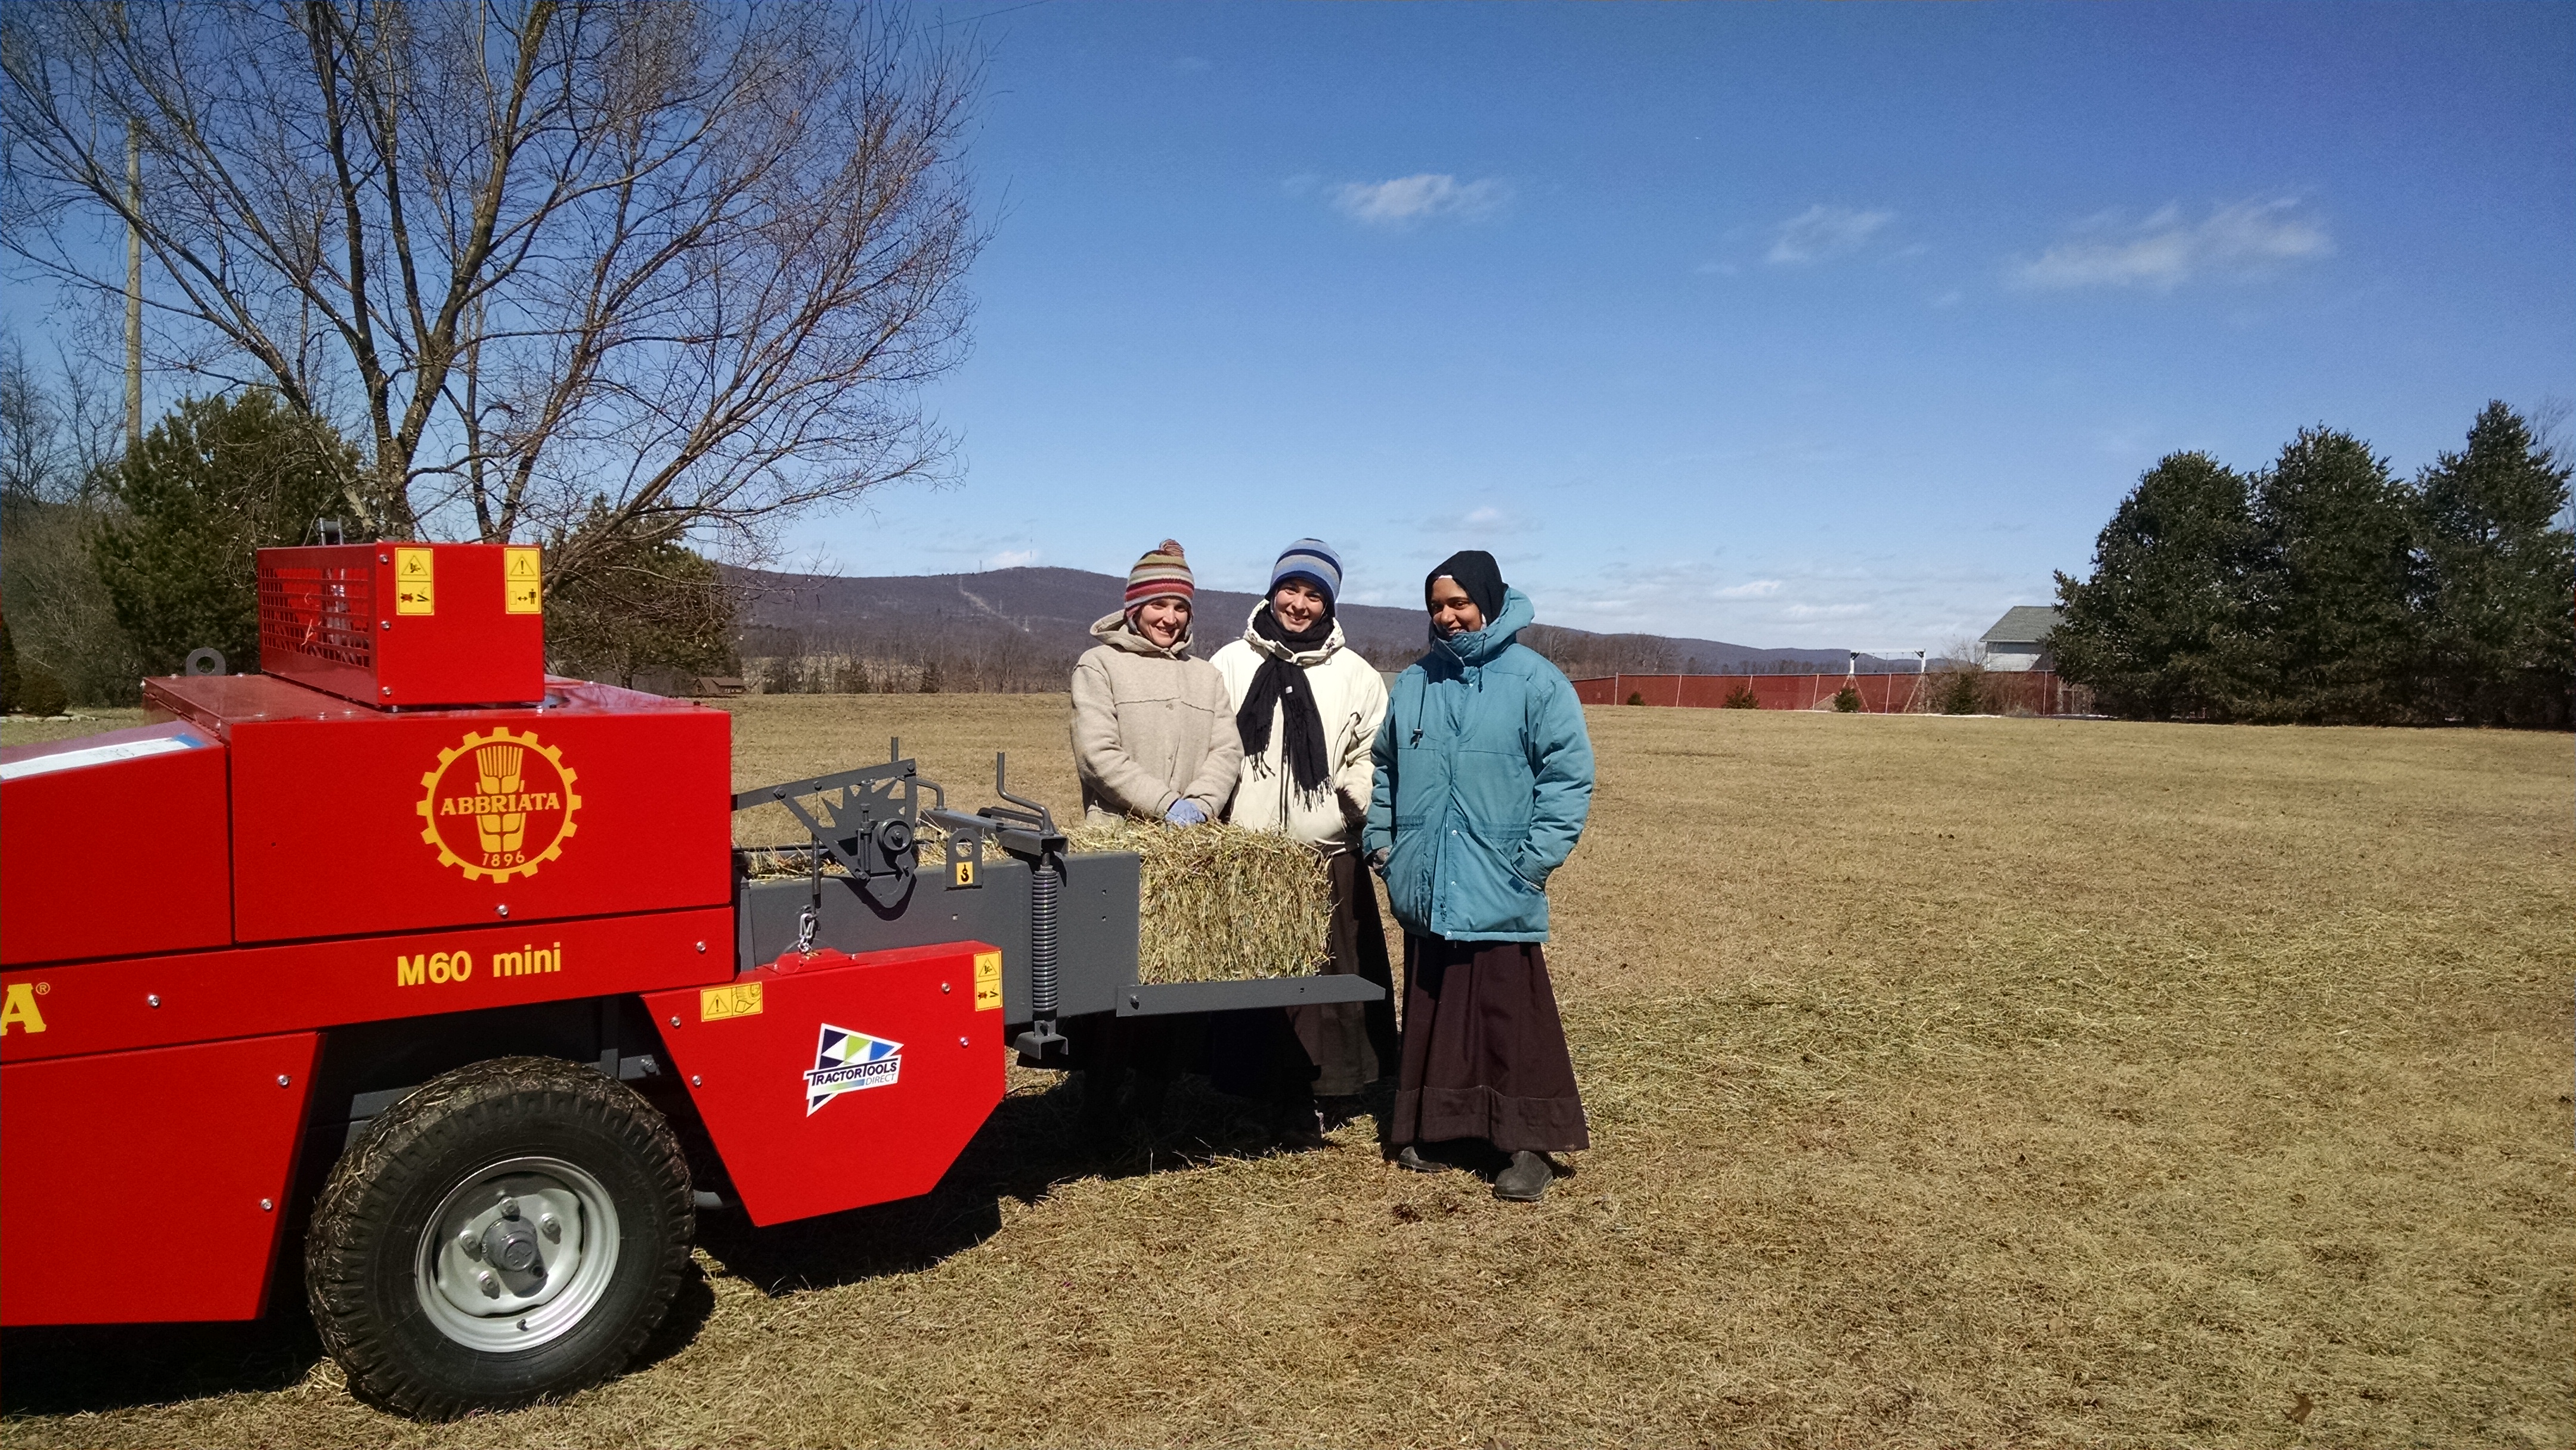 The nuns of Holy Annunciation Monastery with their new Abbriata square baler from Tractor Tools Direct. 